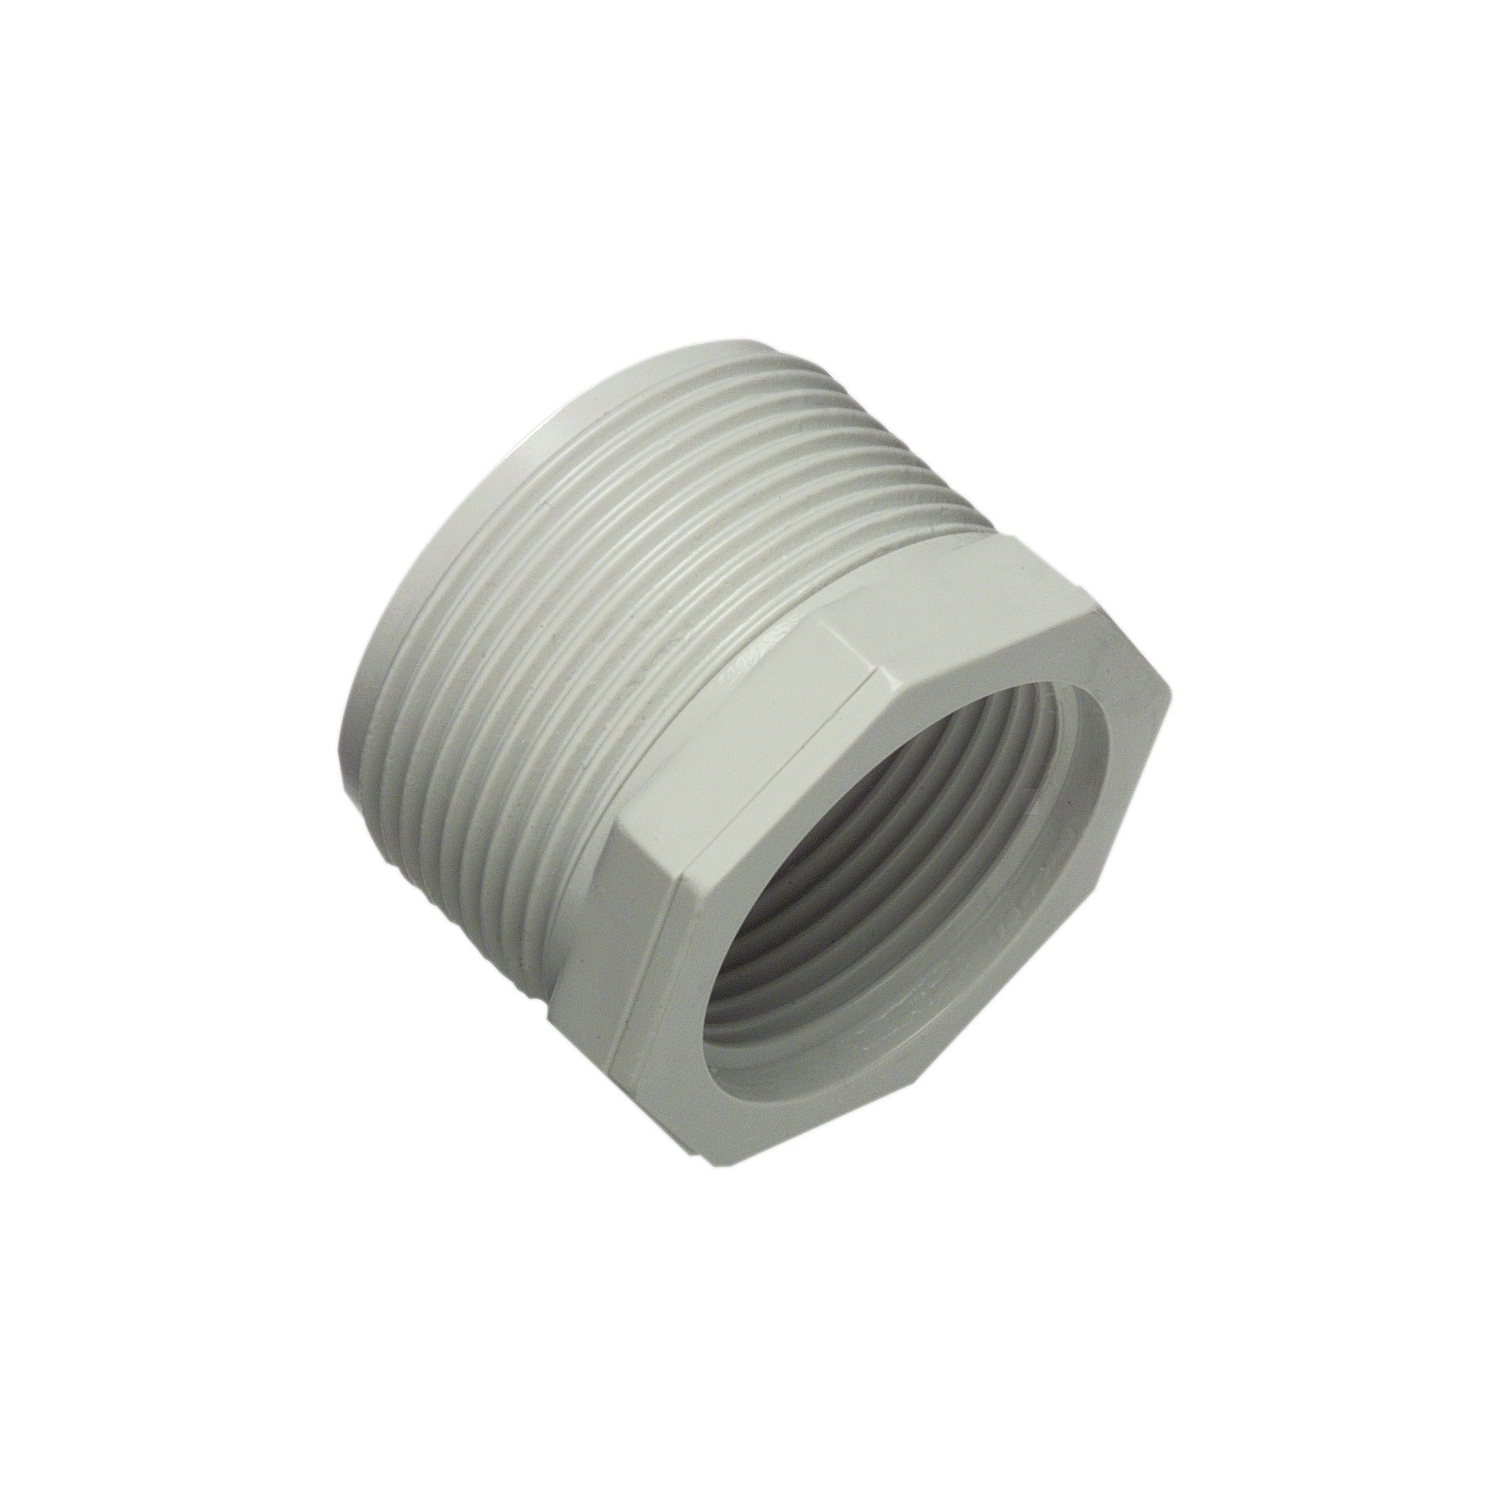 Solid Fittings - PVC, Screwed Reducers, 20mm - 16mm, Grey